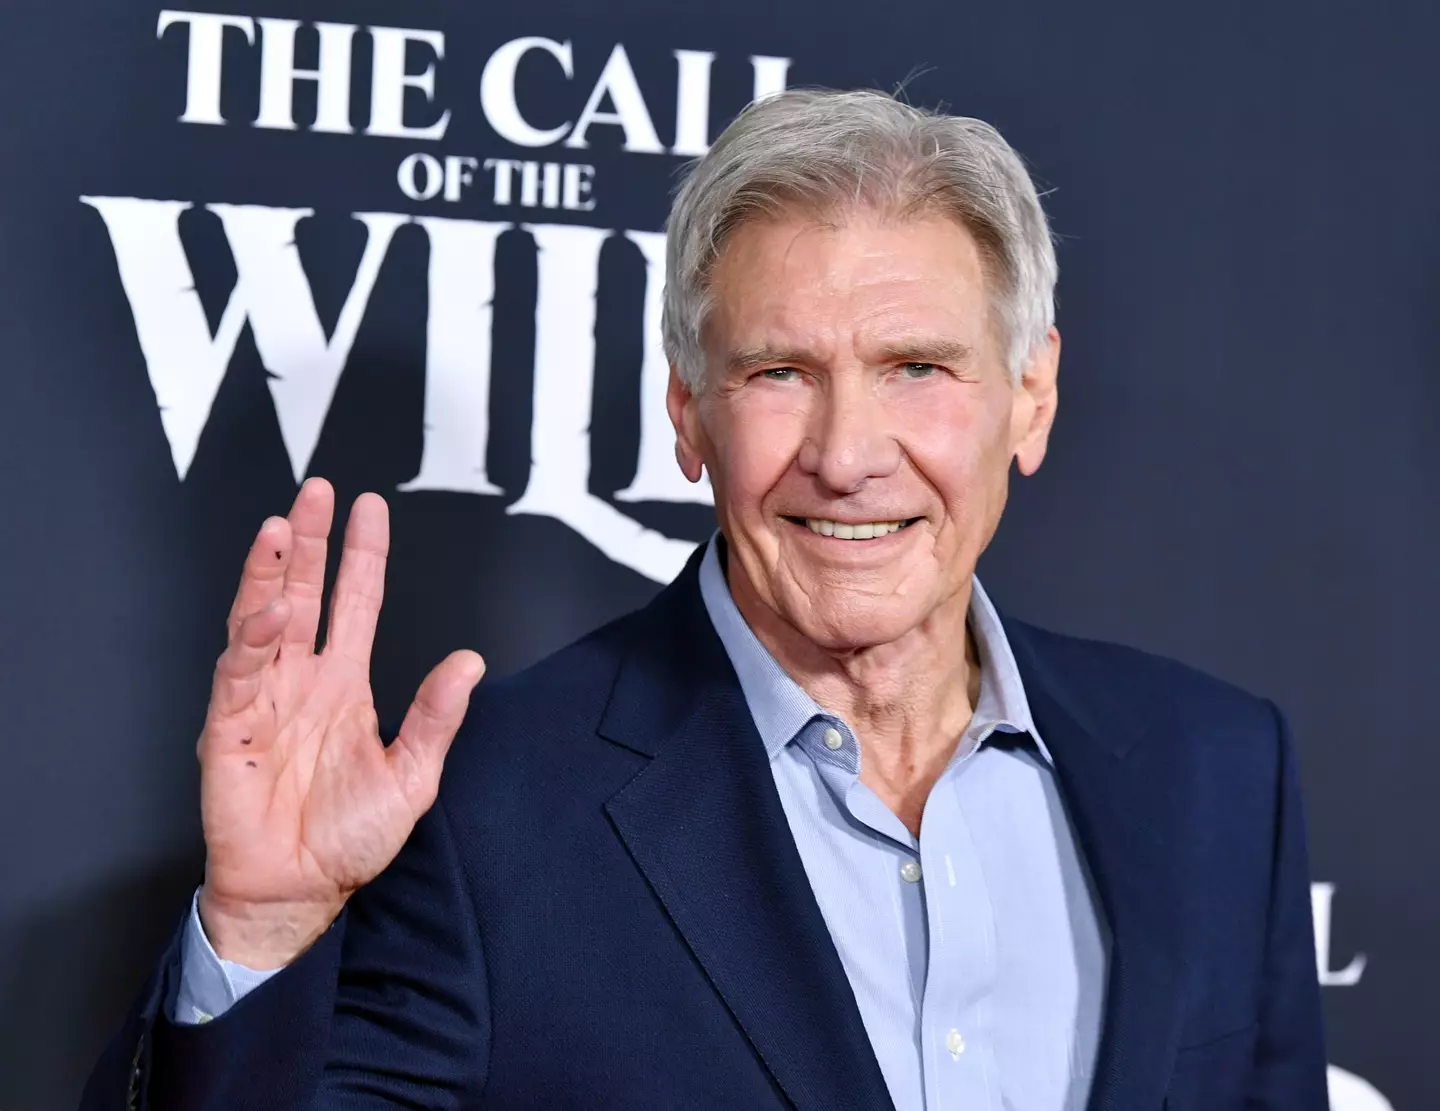 Harrison Ford is probably making more than that studio official. Amy Sussman/Getty Images